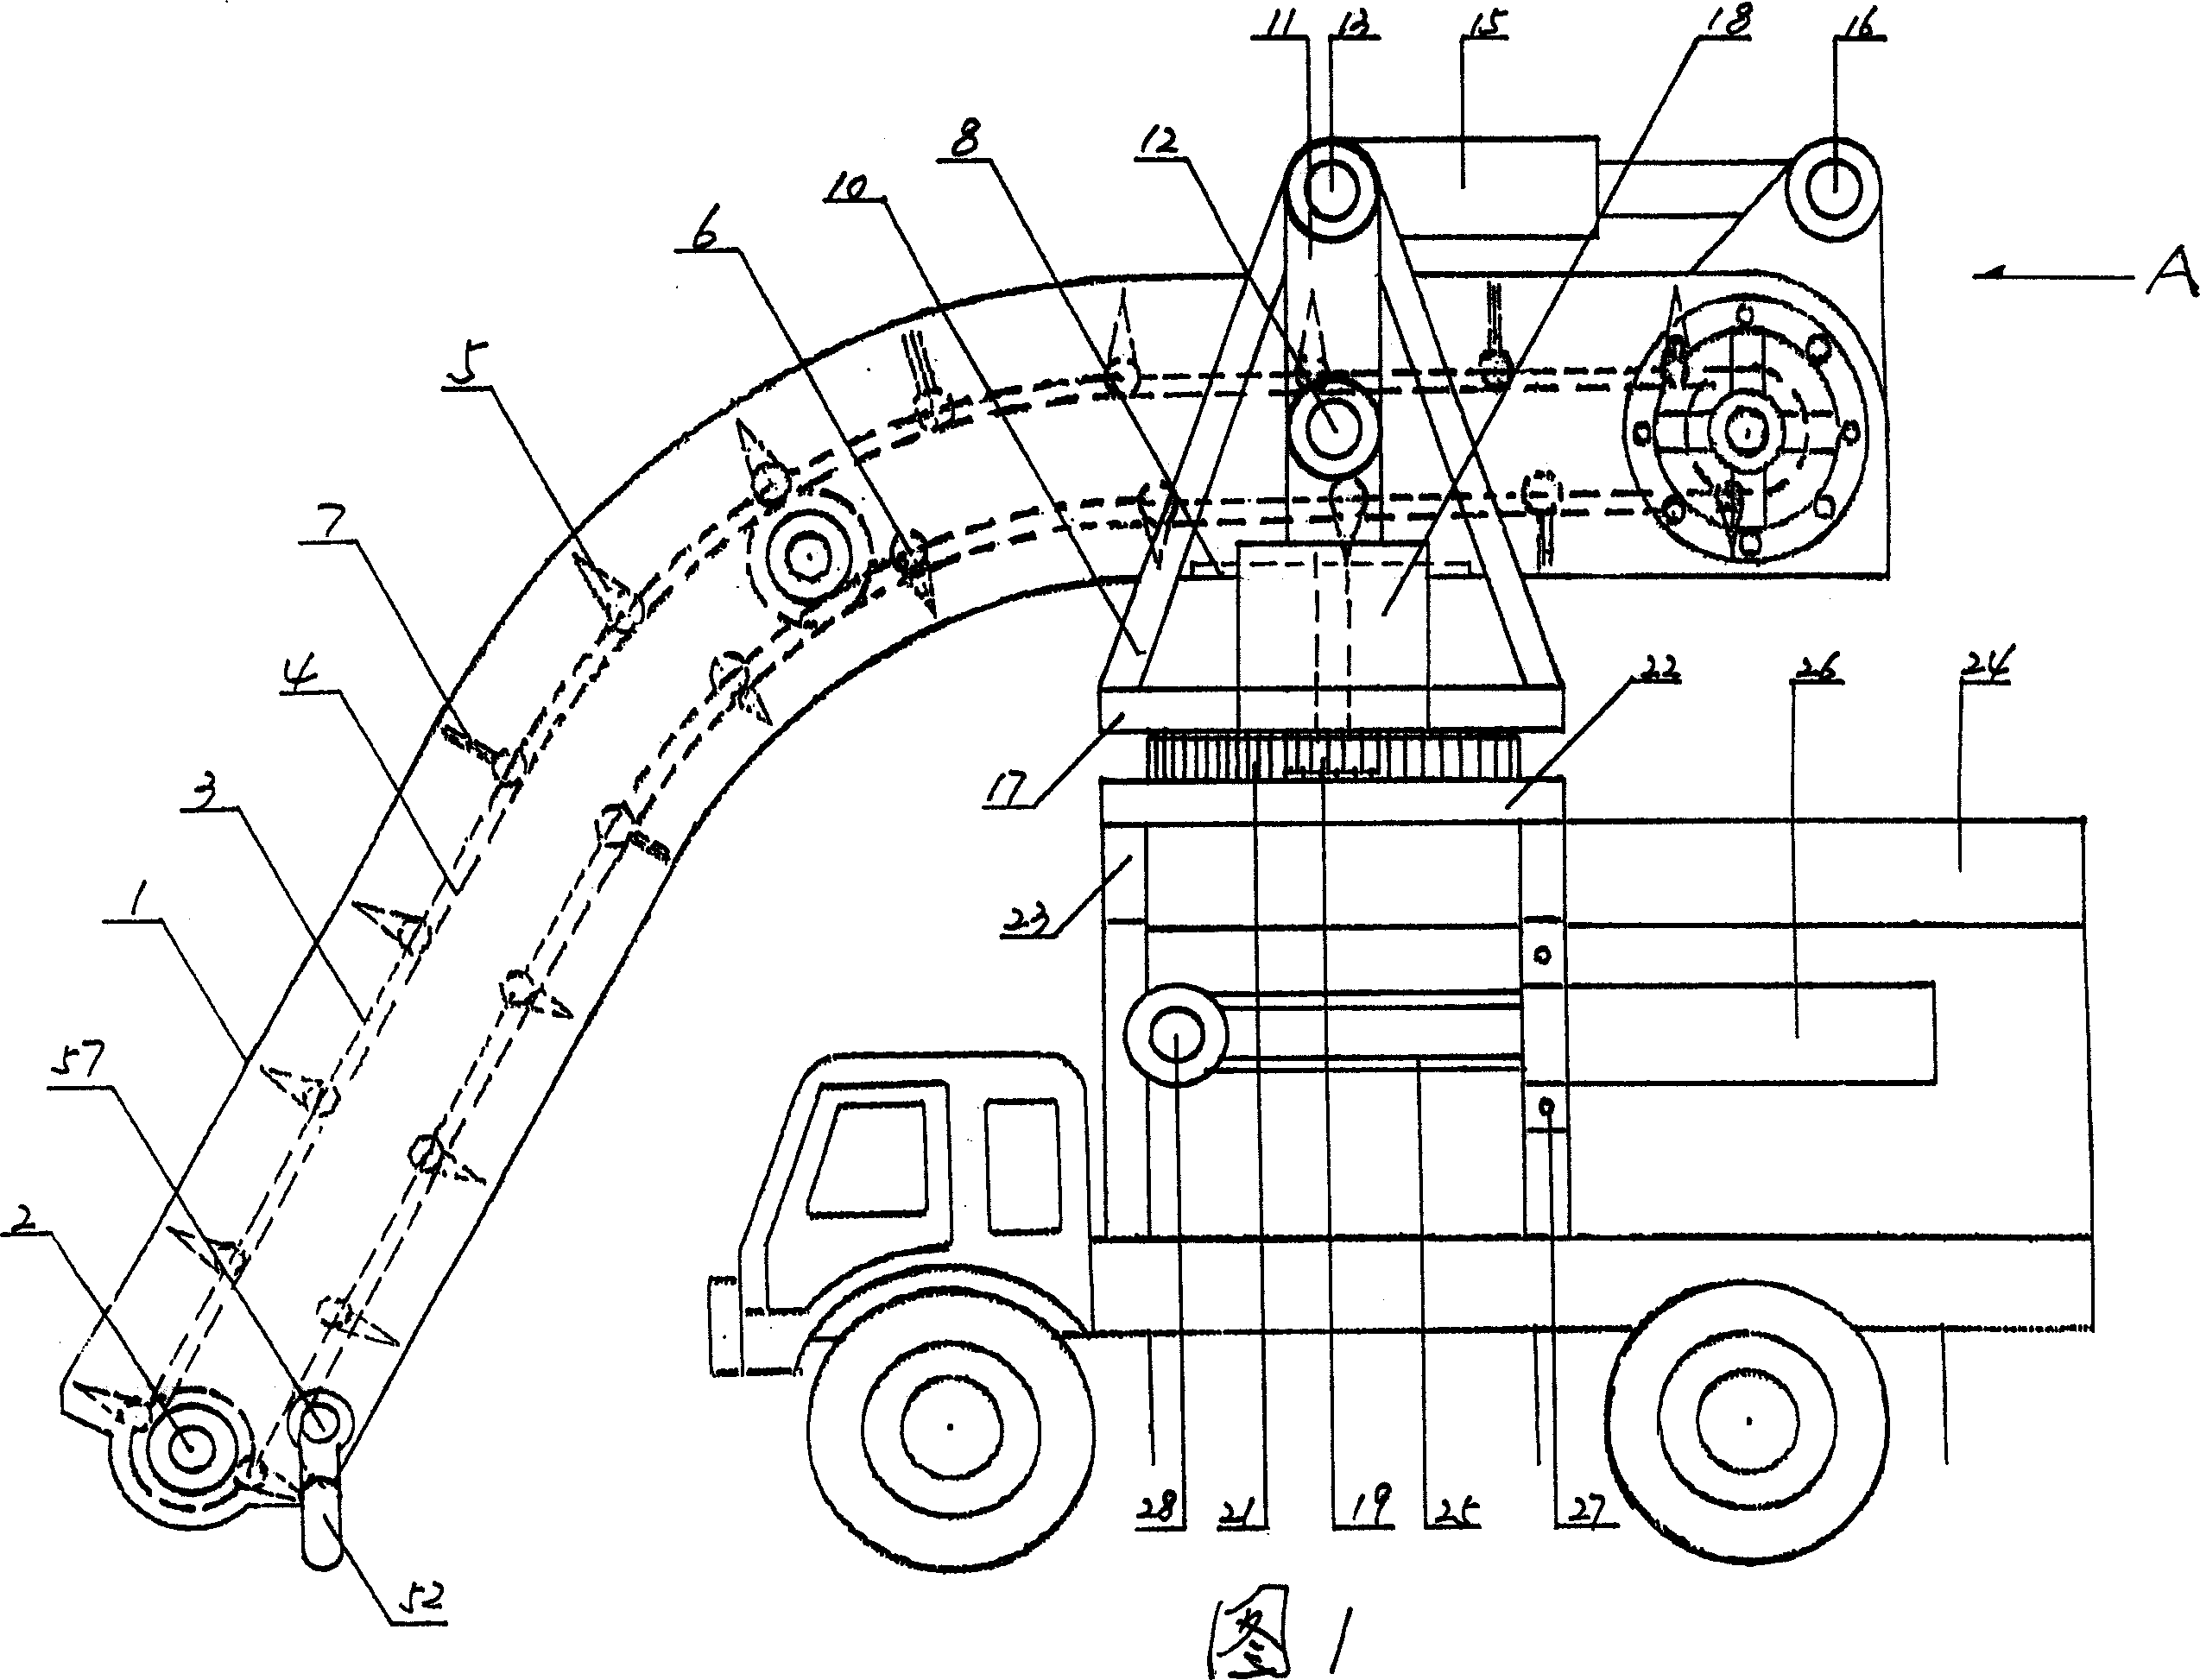 Self-loading and self-compression garbage truck